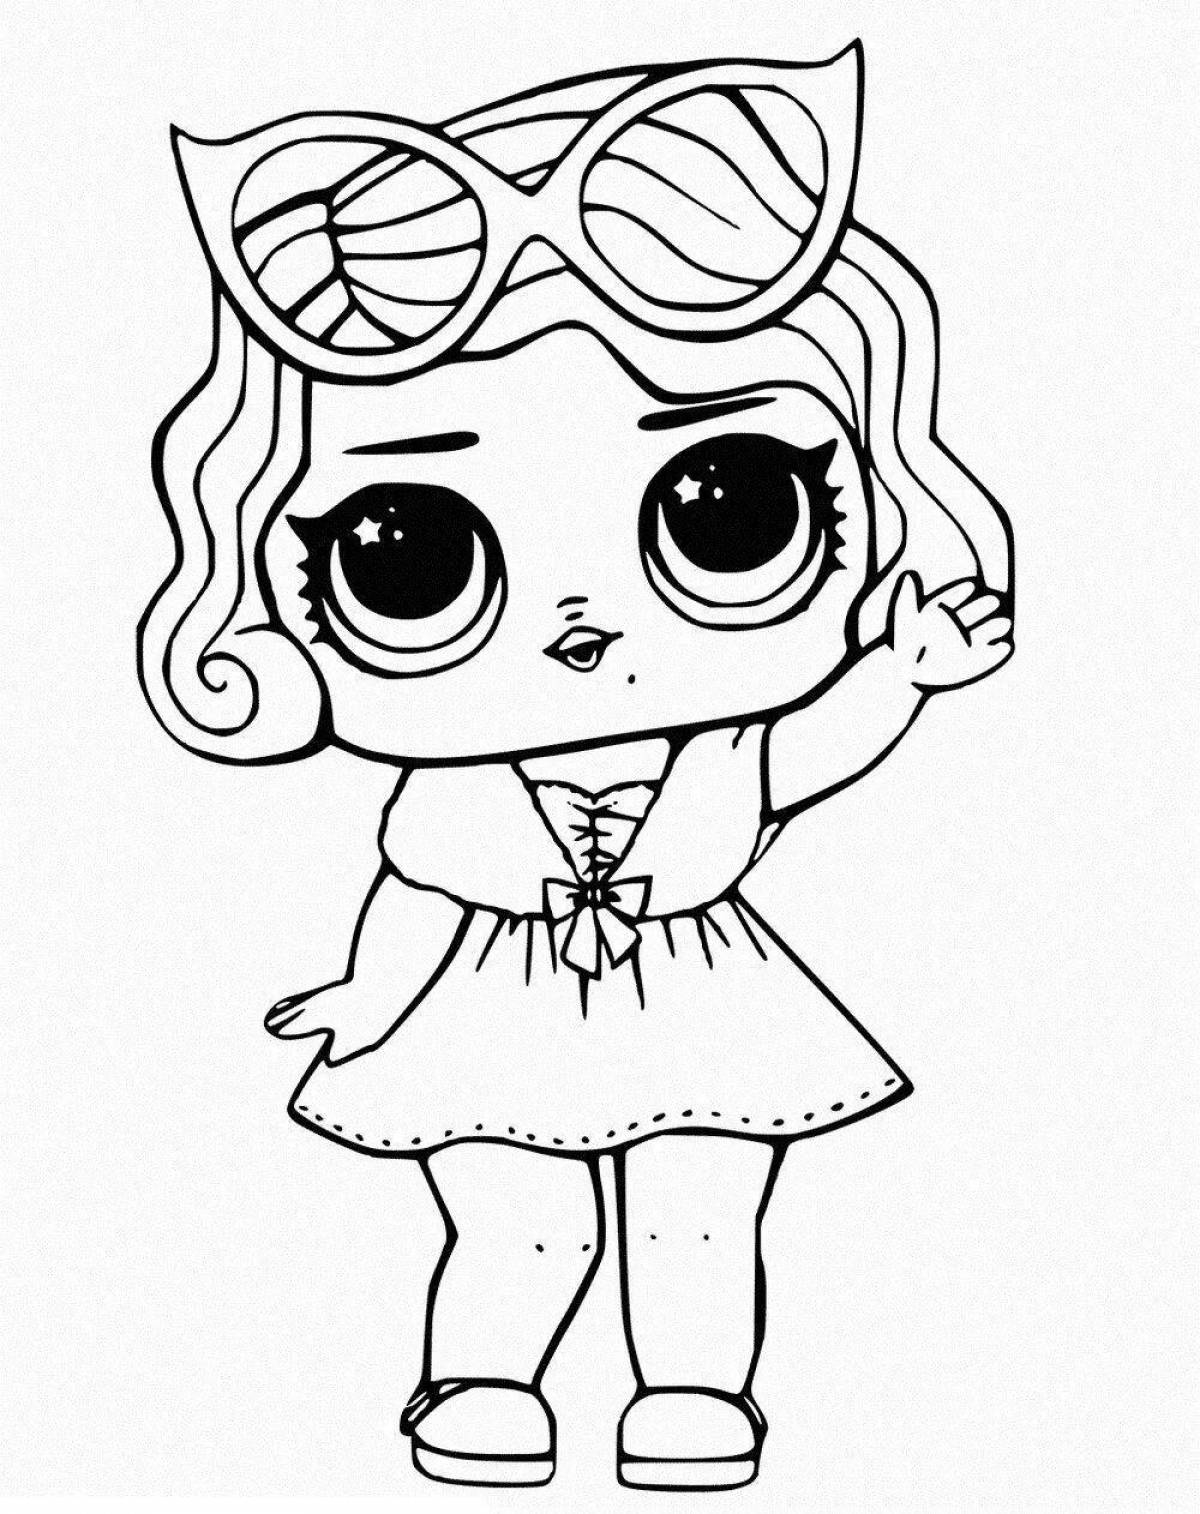 Exciting lo doll coloring page